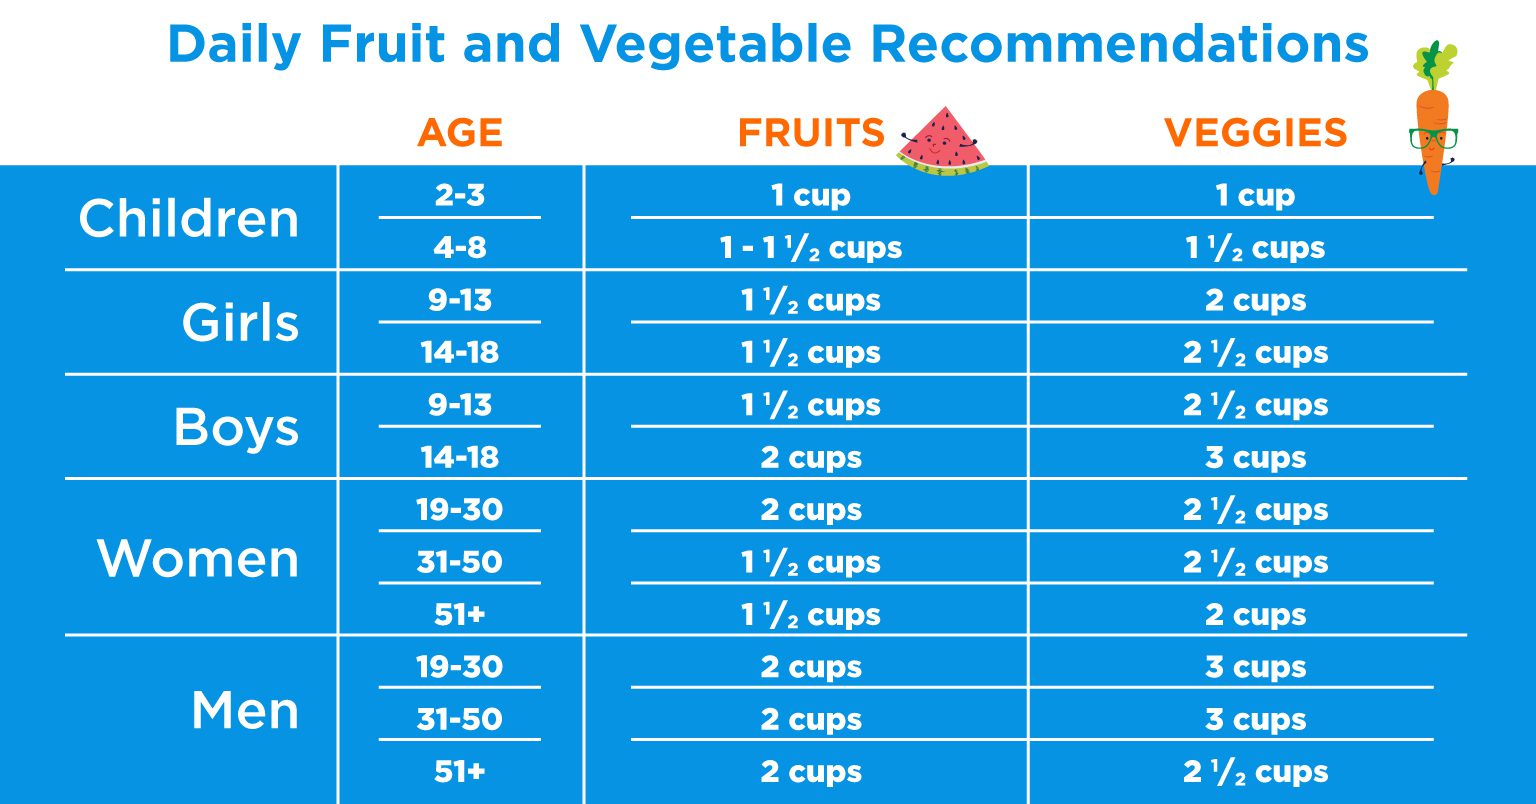 Daily fruit and vegetable recommendations chart